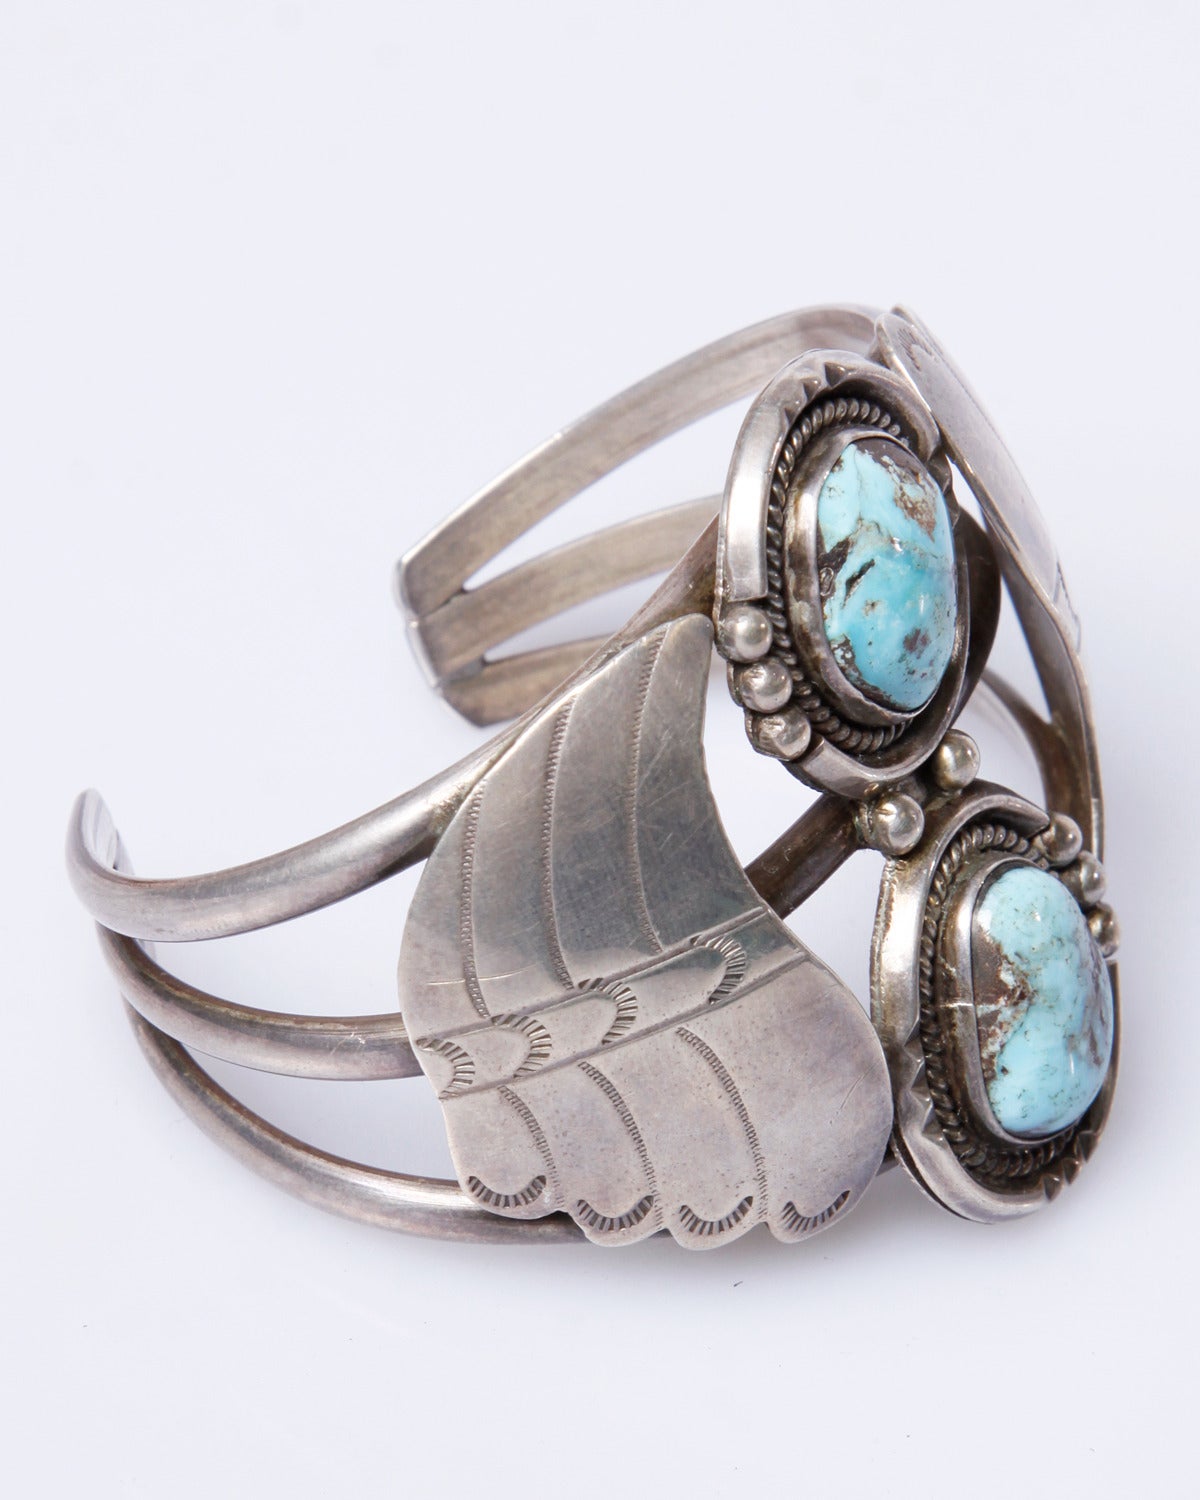 Gorgeous sterling silver Navajo cuff with two chunky turquoise stones. Cuff is adjustable and can be bent to the wearer's wrist size. An absolutely beautiful hand made piece!

Details:

No Closure/ Slip On
Estimated Size: Adjustable
Material: